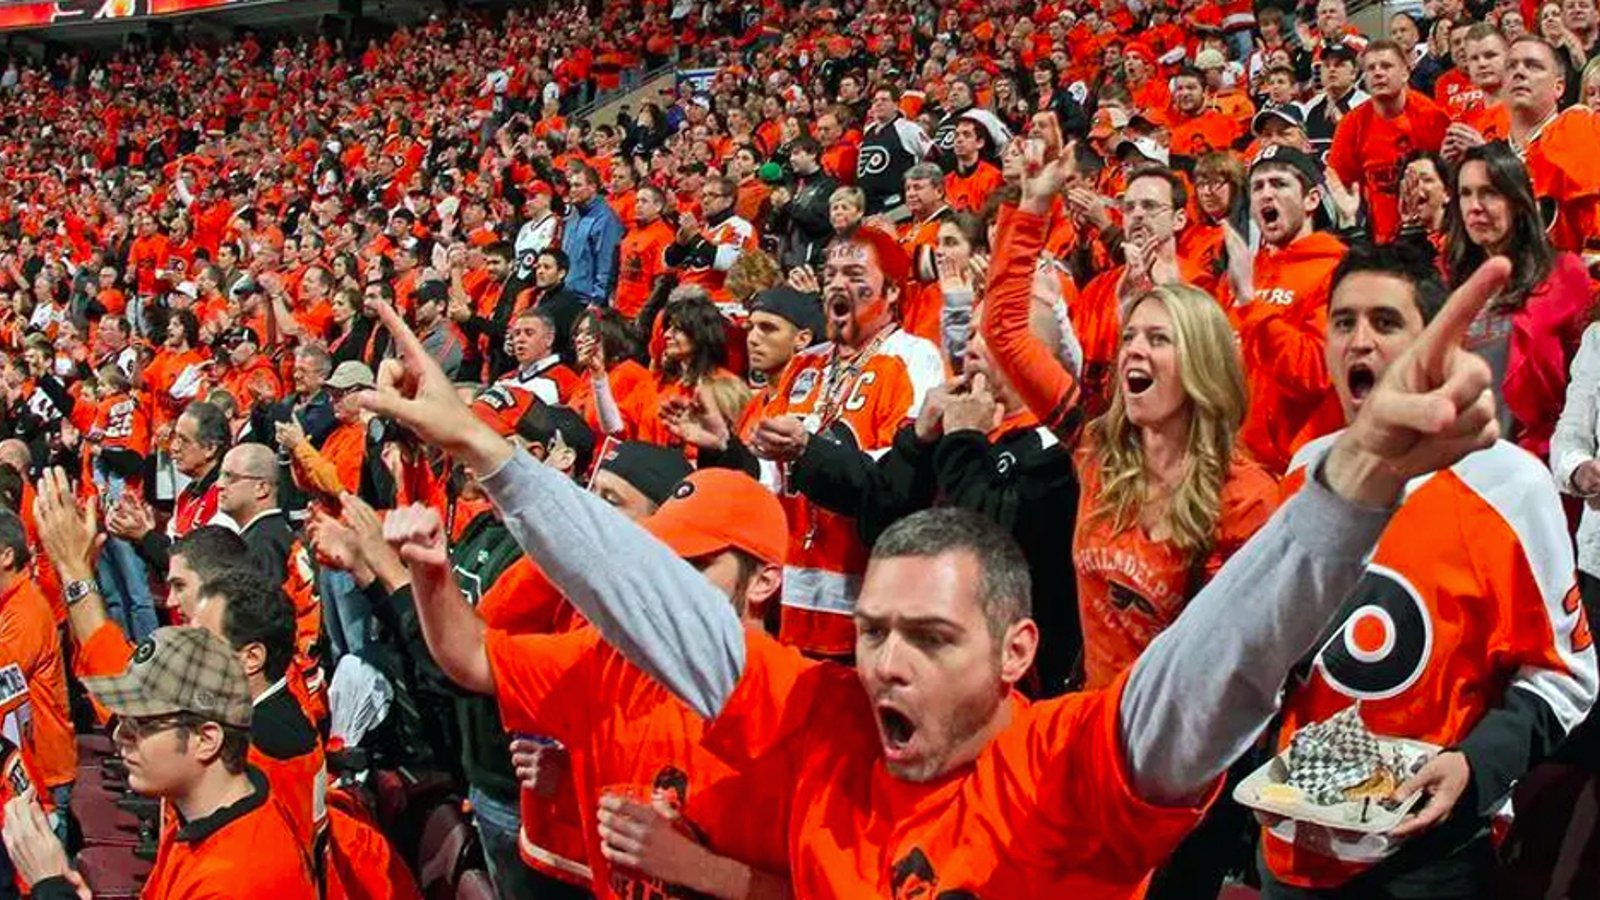 Flyers become the first NHL team to step up and offer refunds for postponed games